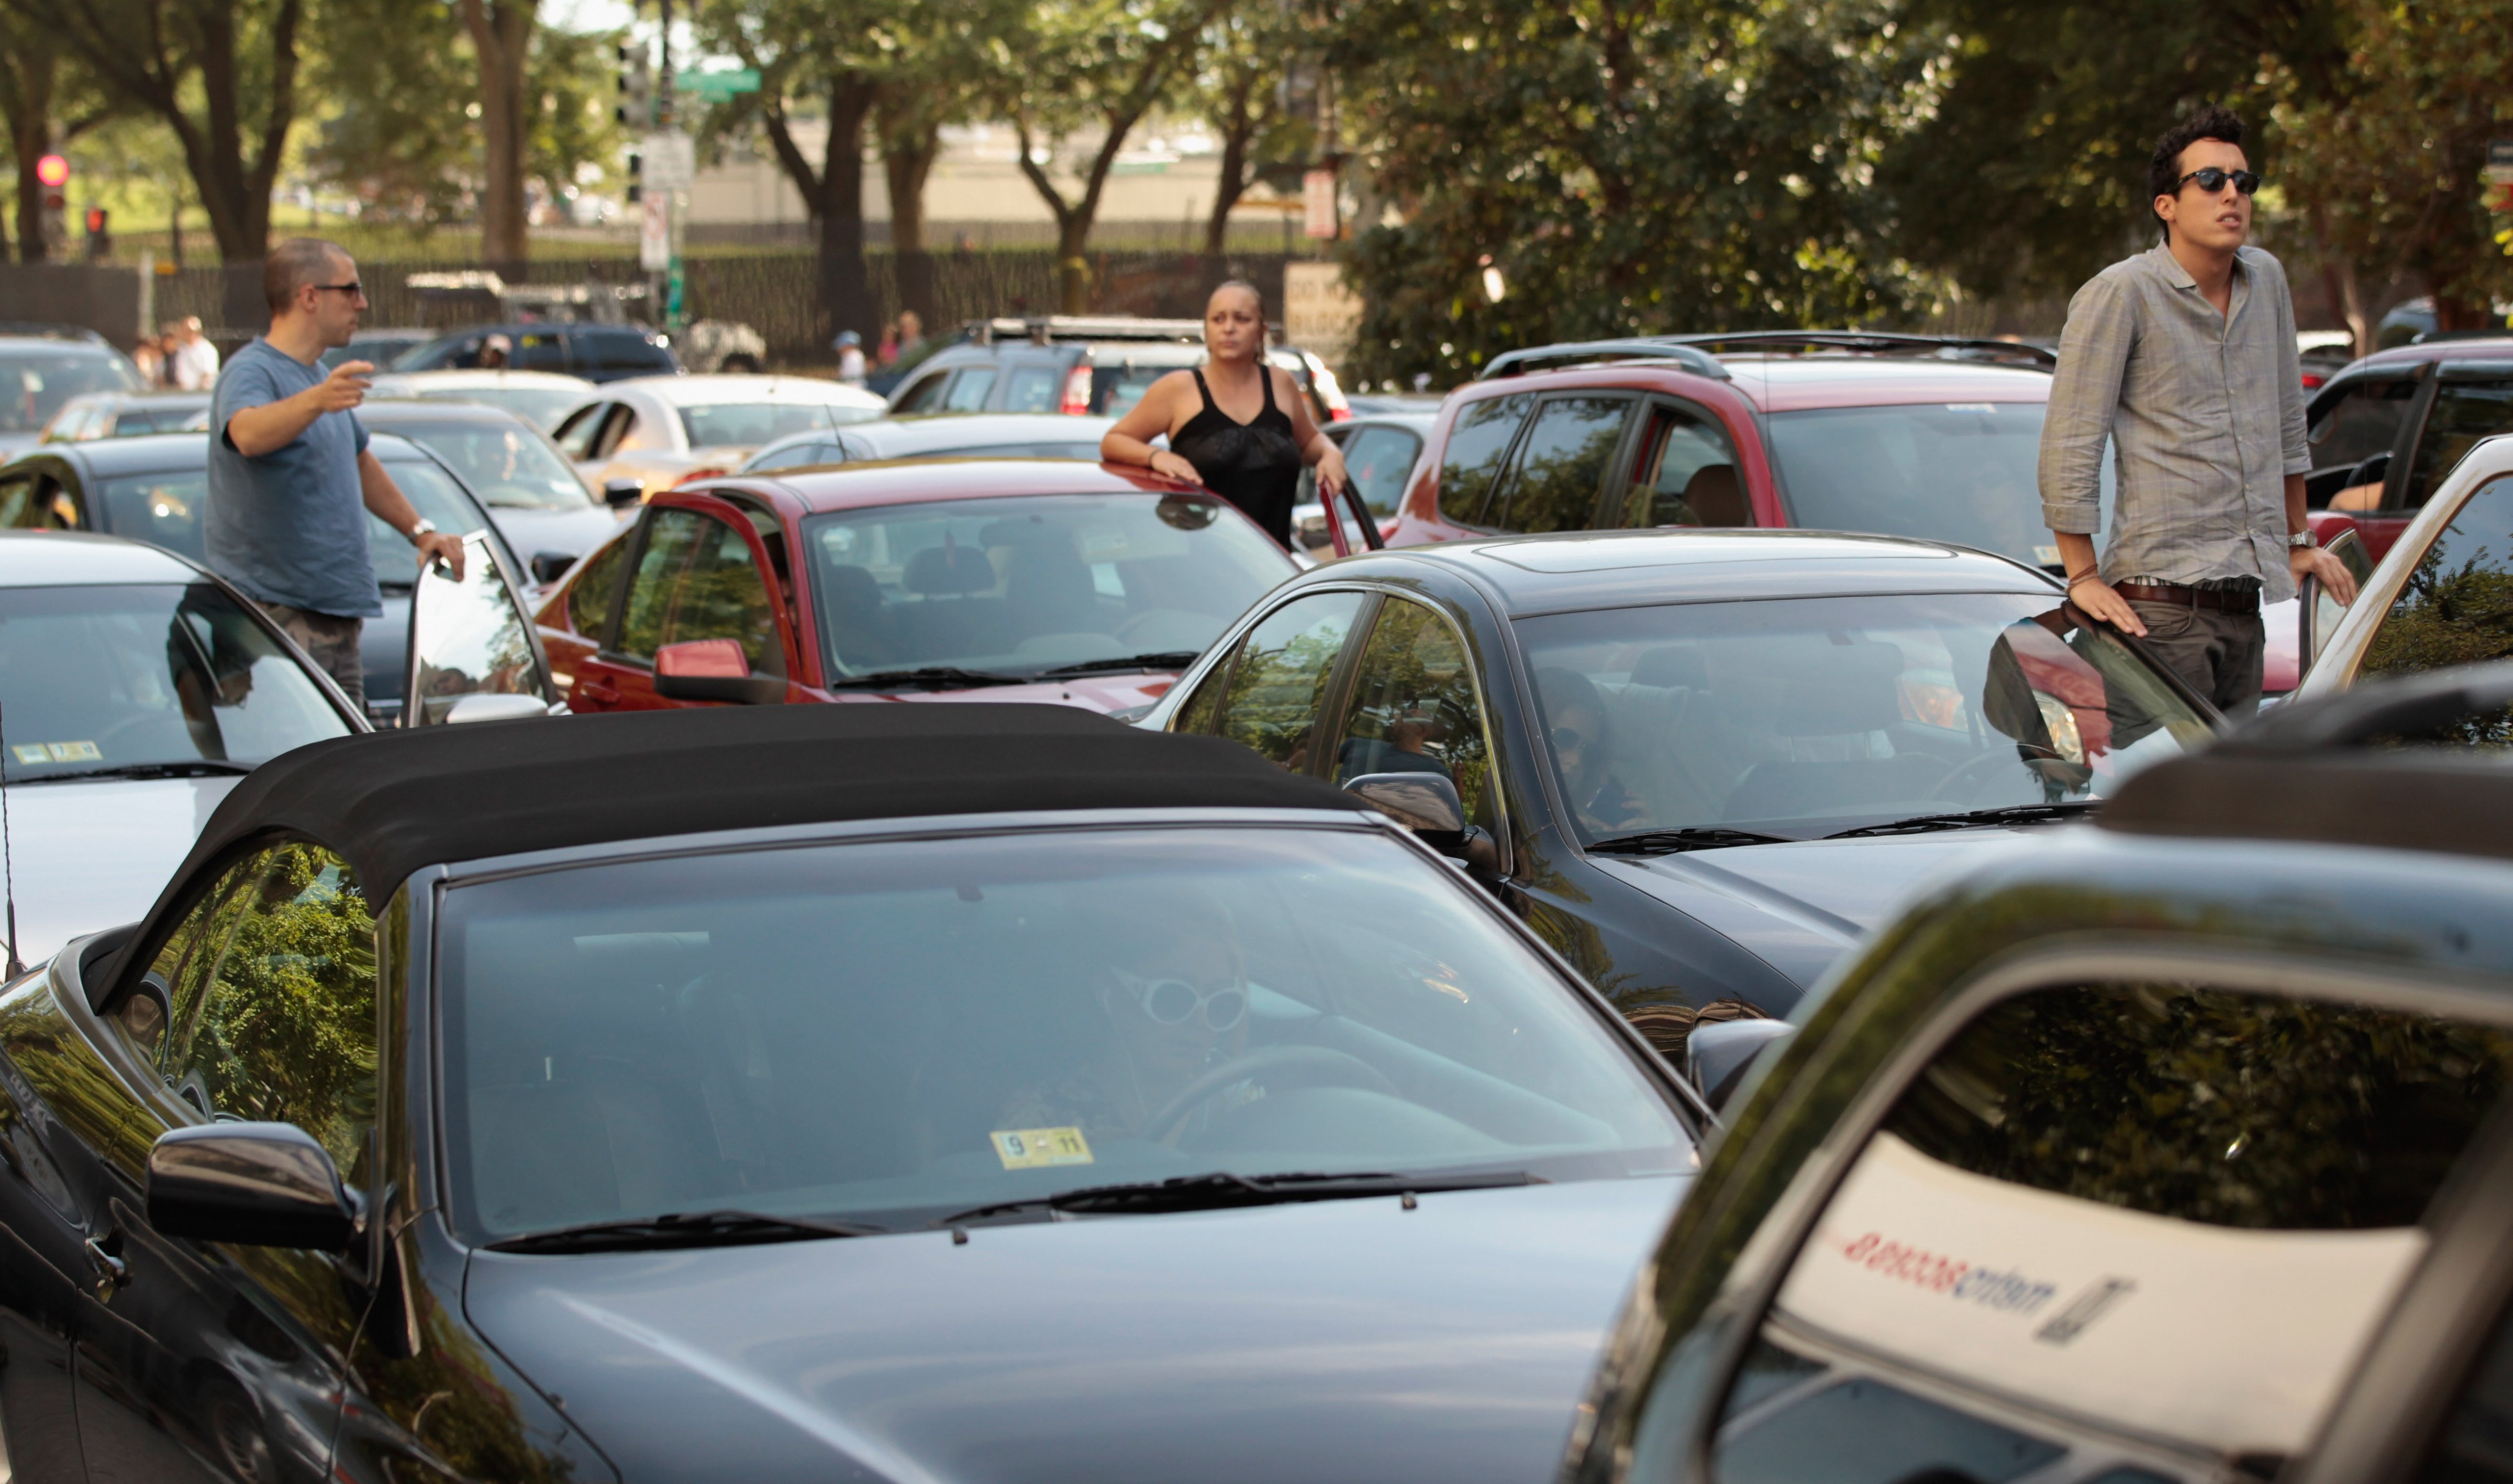 Drivers climb out of their cars to survey a traffic jam on August 23, 2011 in Washington D.C. (Chip Somodevilla—Getty Images)